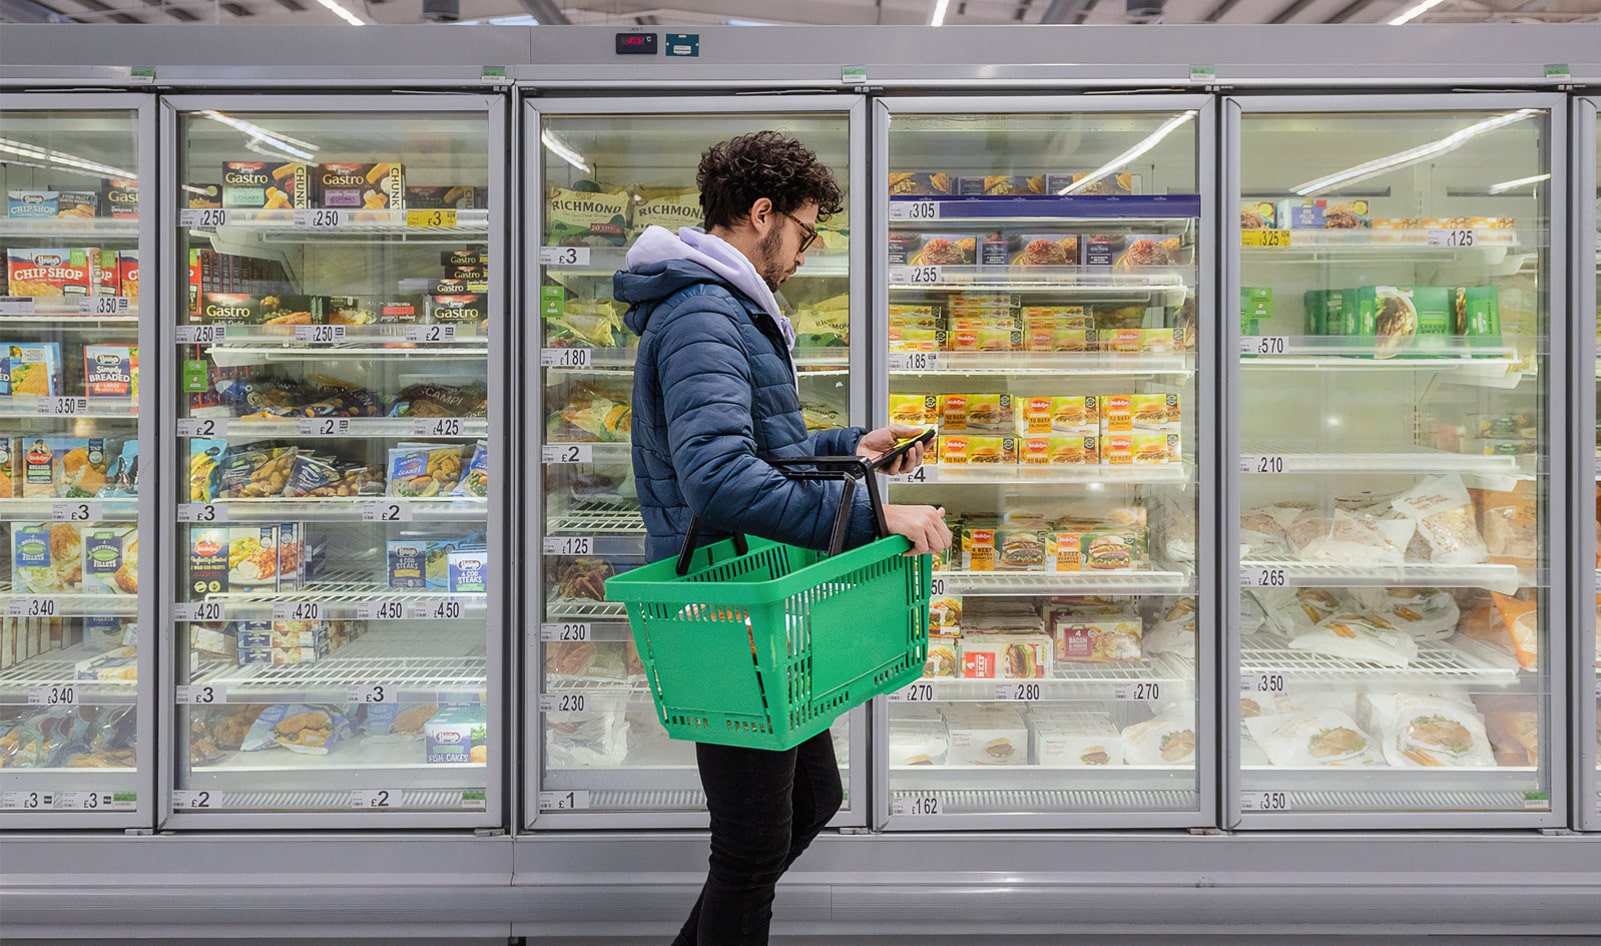 Plant-Based Foods Attracted 1.6 Million New Households from 2019 to 2021, Kroger Finds